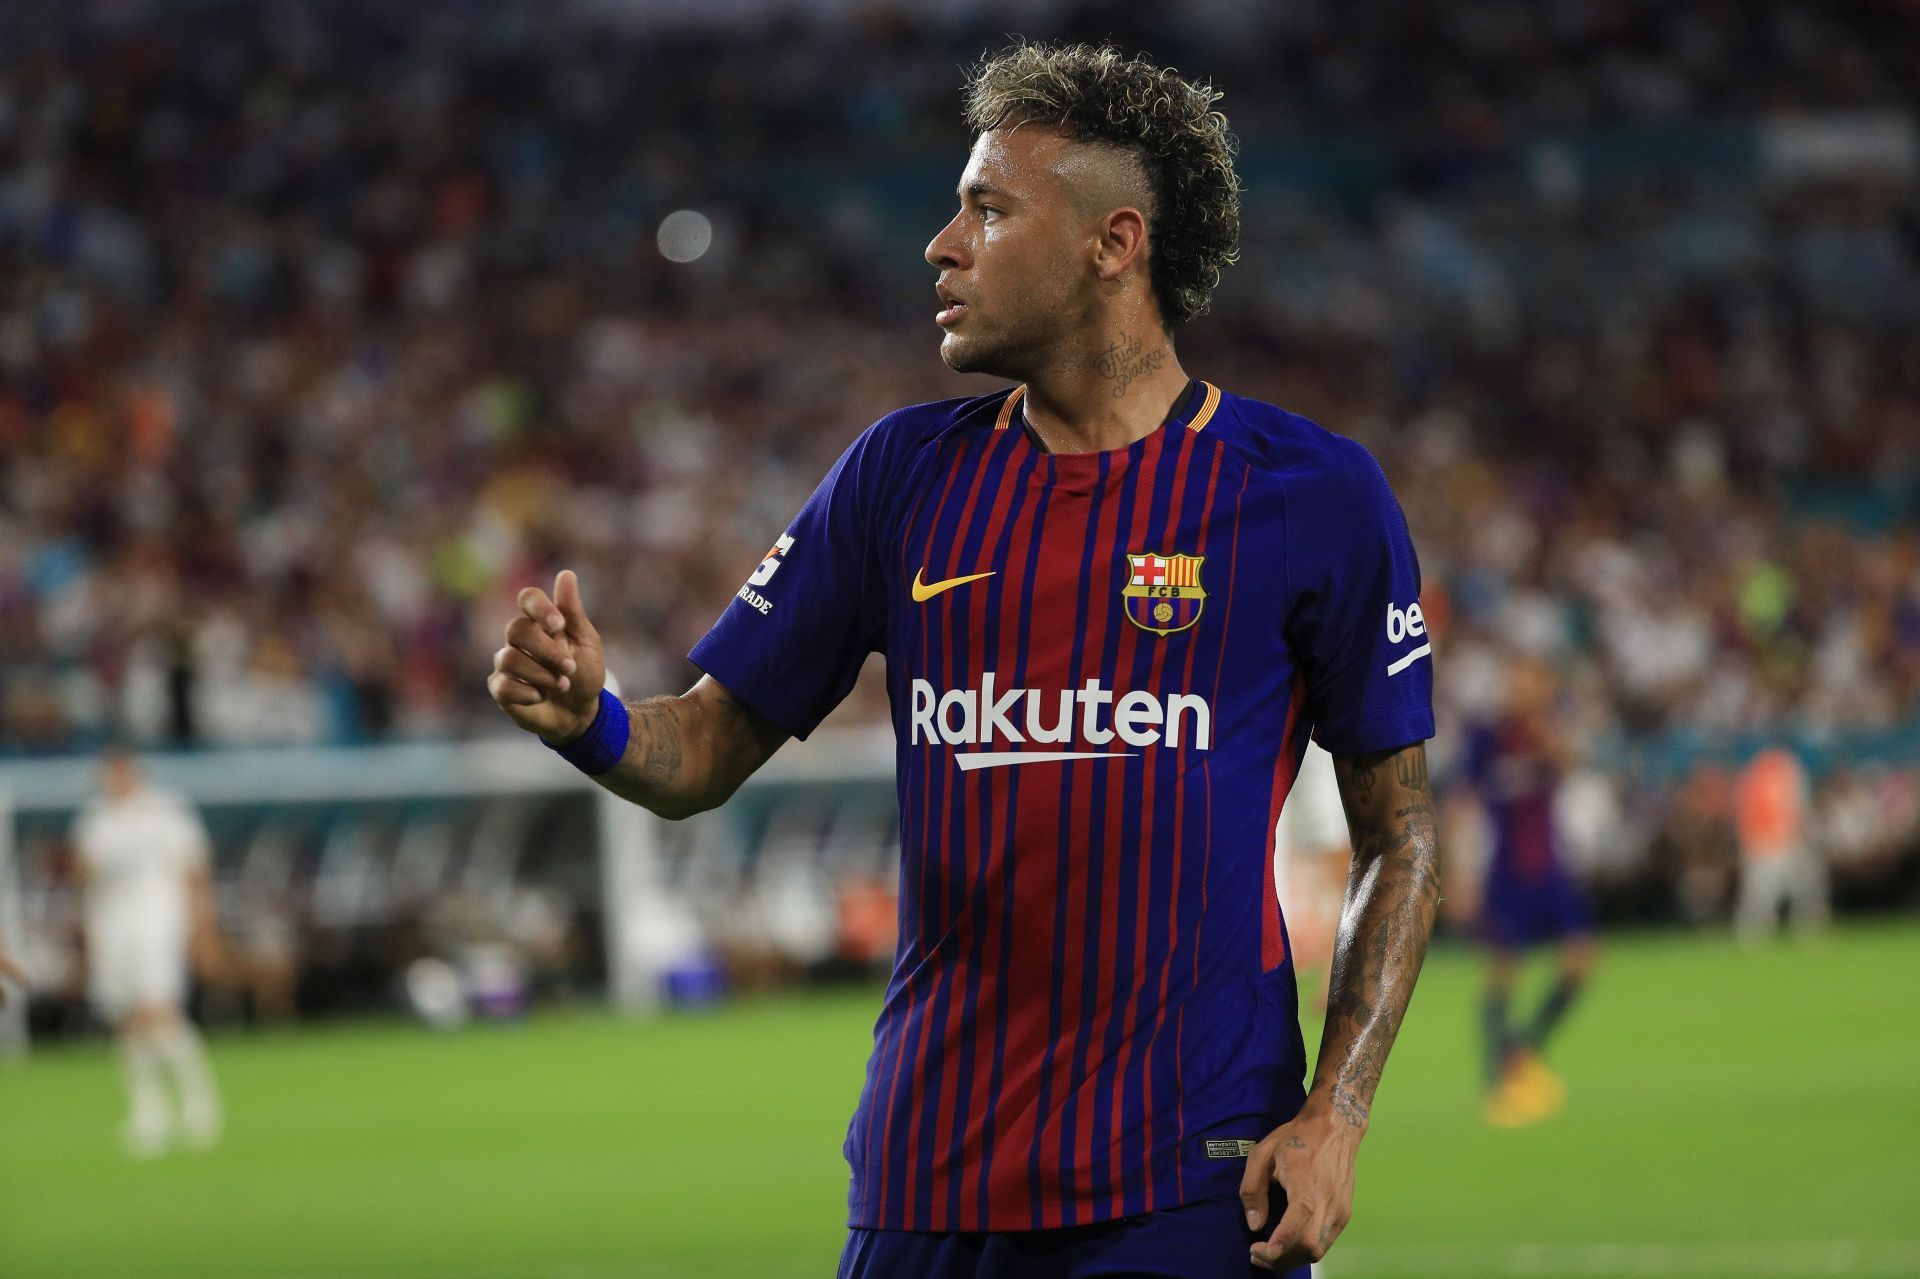 Neymar has scored a lot of goals against his current club PSG